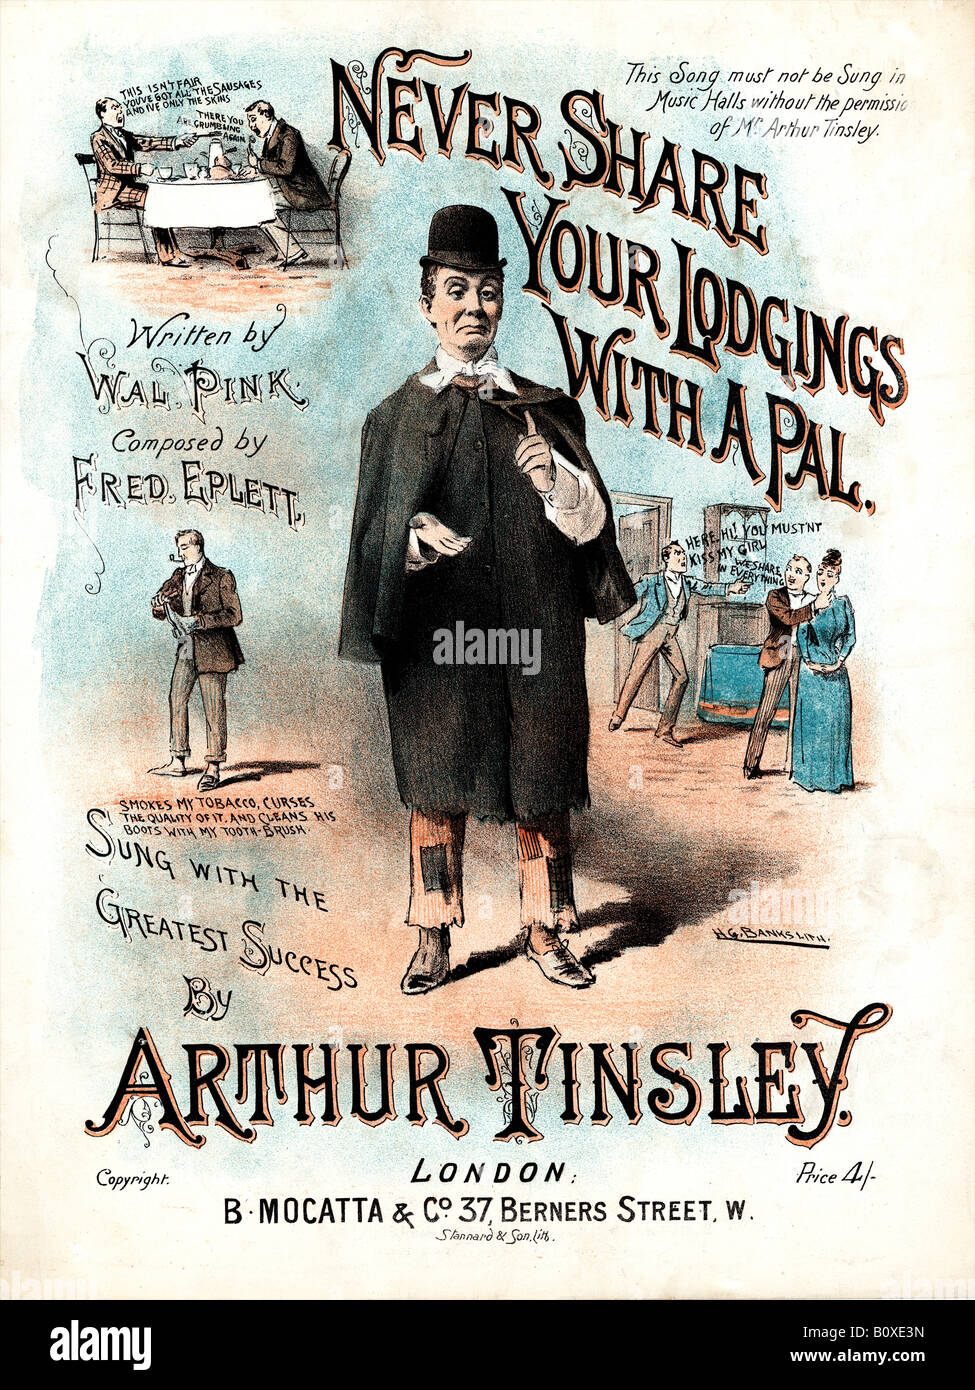 Never Share Your Lodgings With A Pal Late Victorian music sheet cover for a comic song sung by Arthur Tinsley written by Wal Pink and Fred Eplett Stock Photo